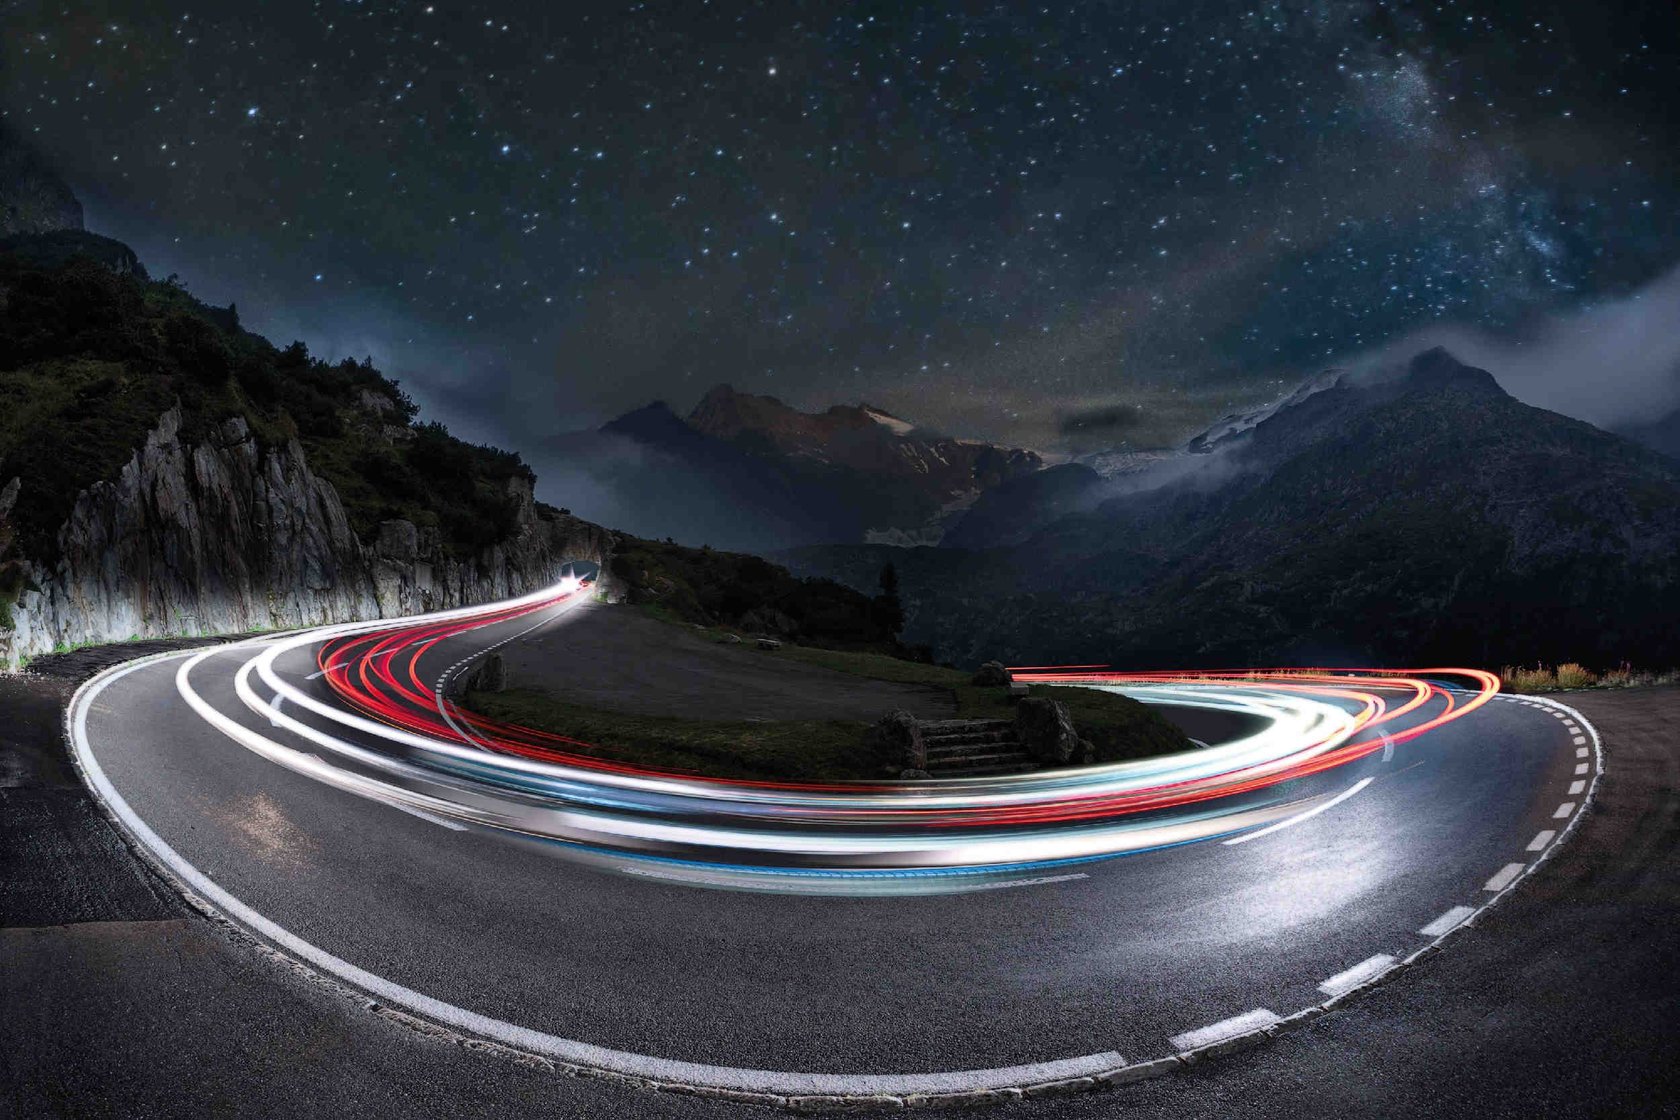 Mixture of light trails from cars on the road